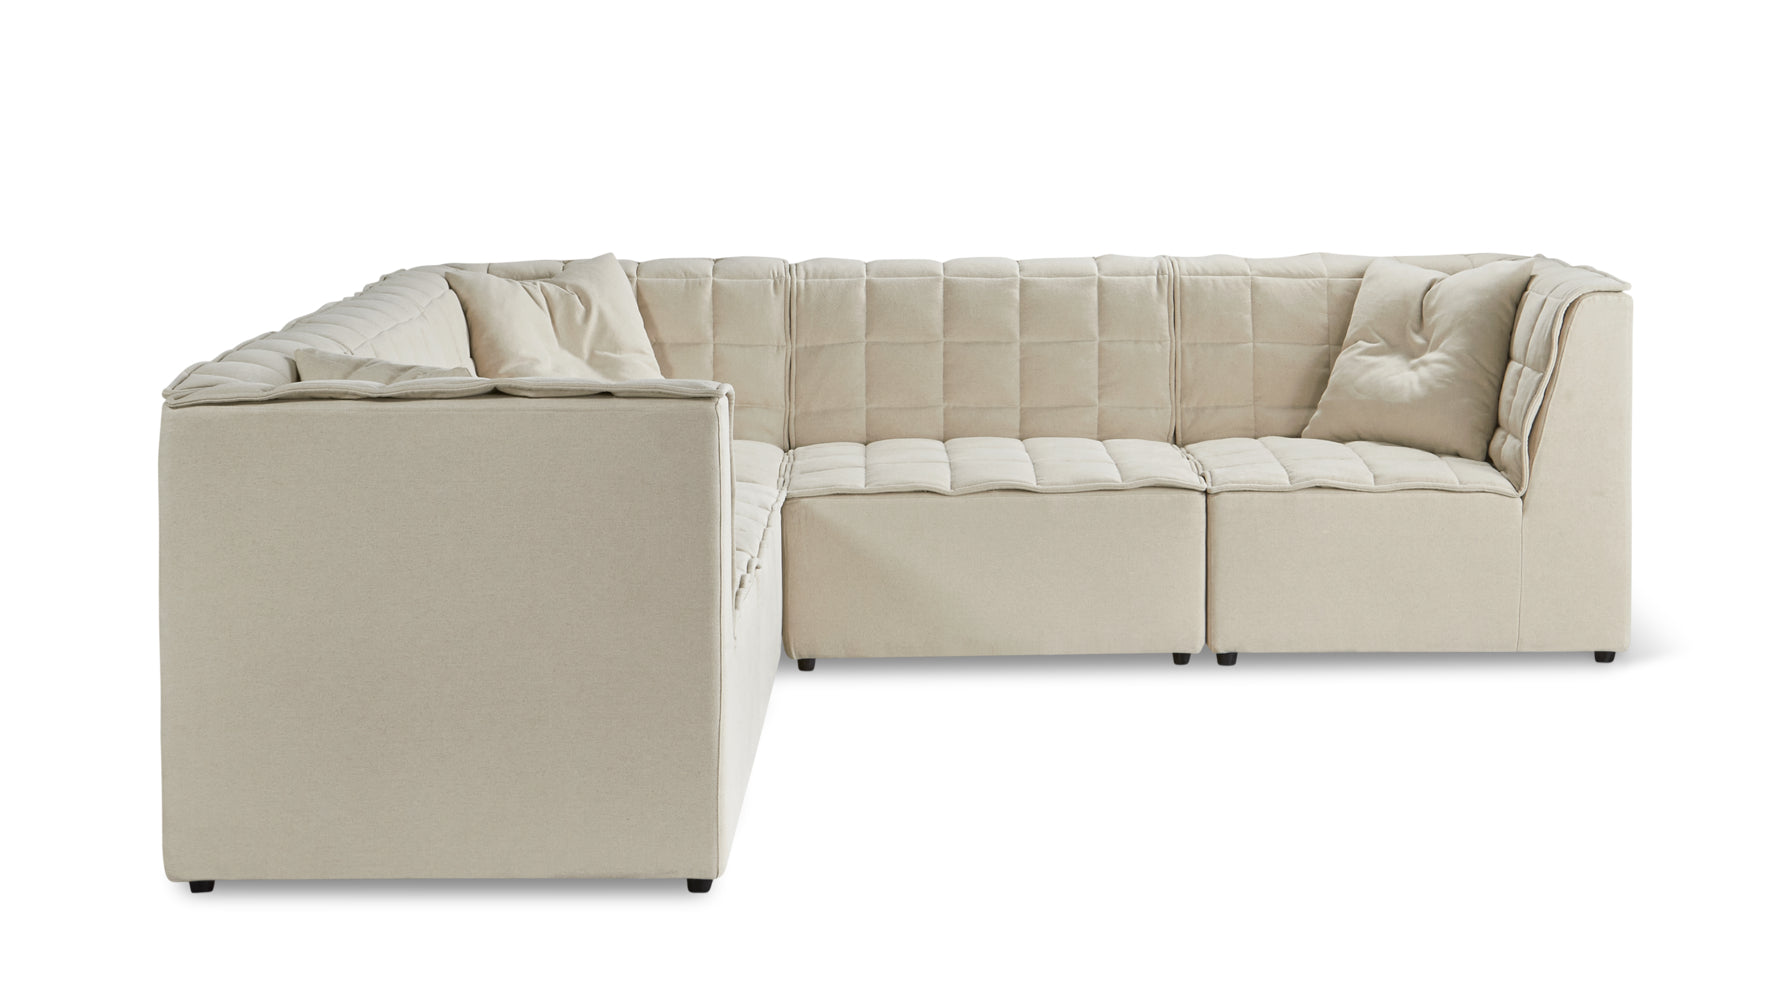 Quilt 5-Piece Modular Sectional Closed, Fawn - Image 1